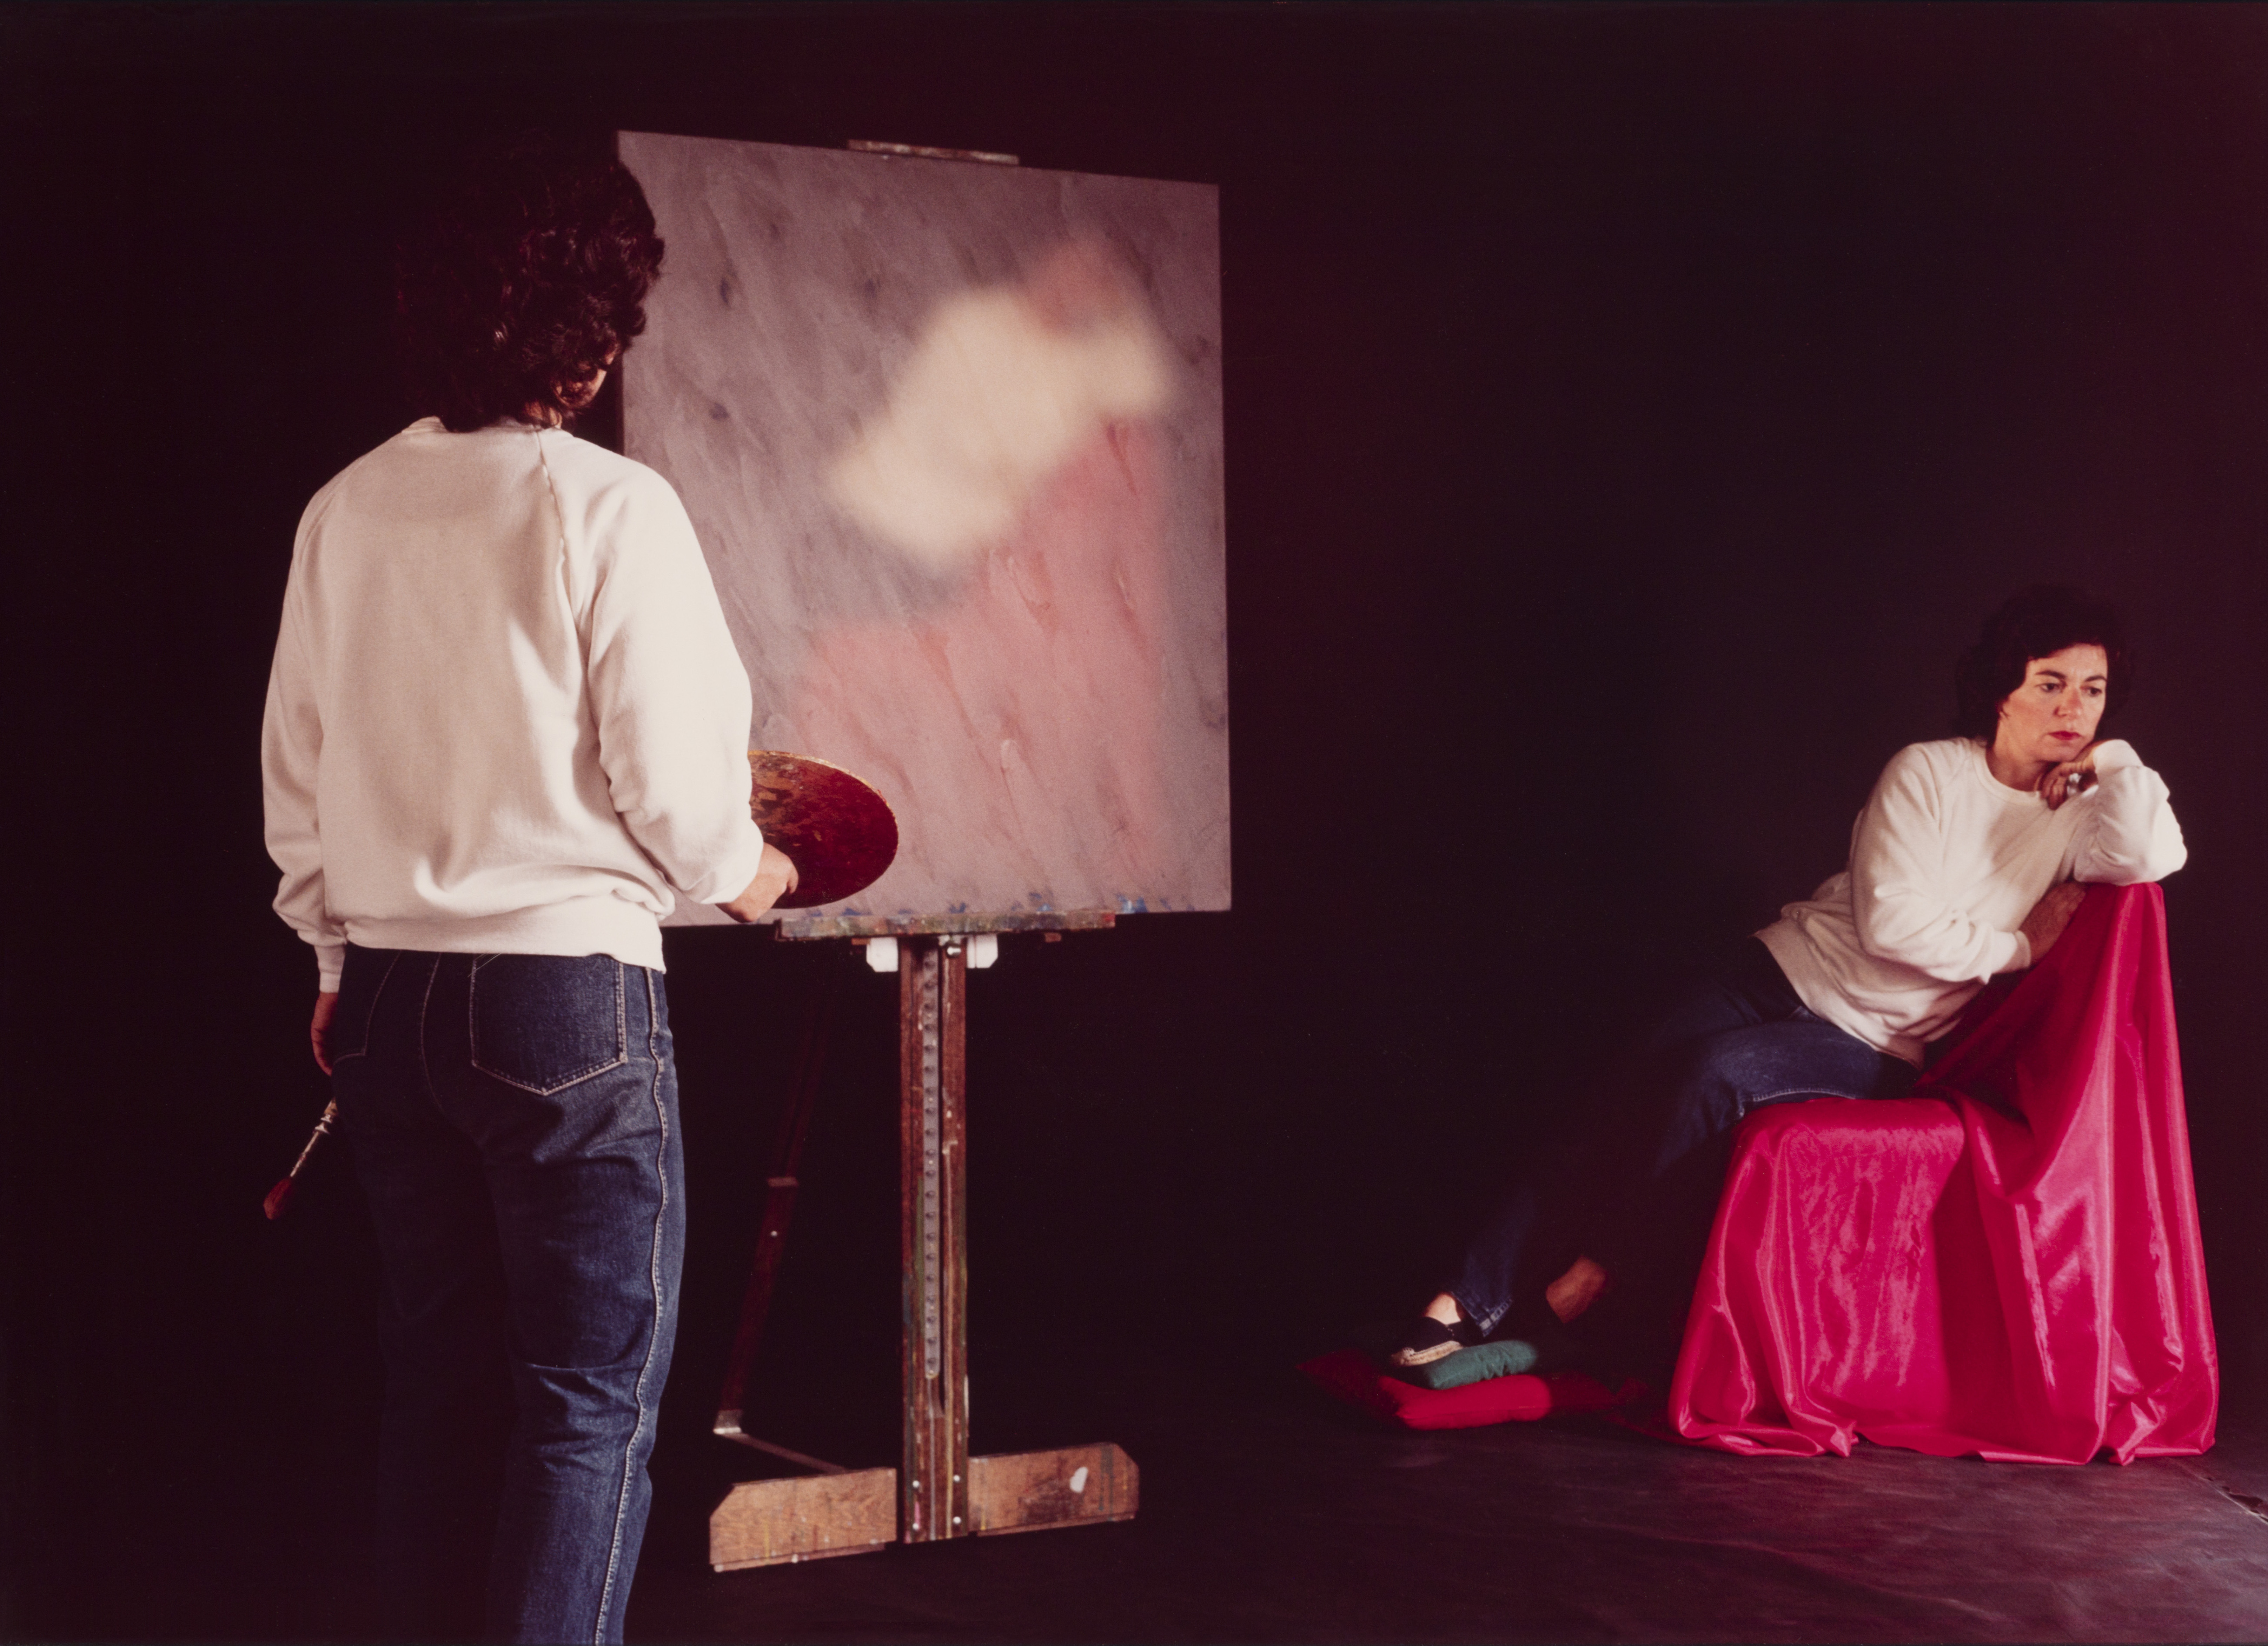 A person in a white sweater and jeans stands in front of a canvas with a paint palette. Beside them on the right is their subject in the same outfit posed on a red draped chair.